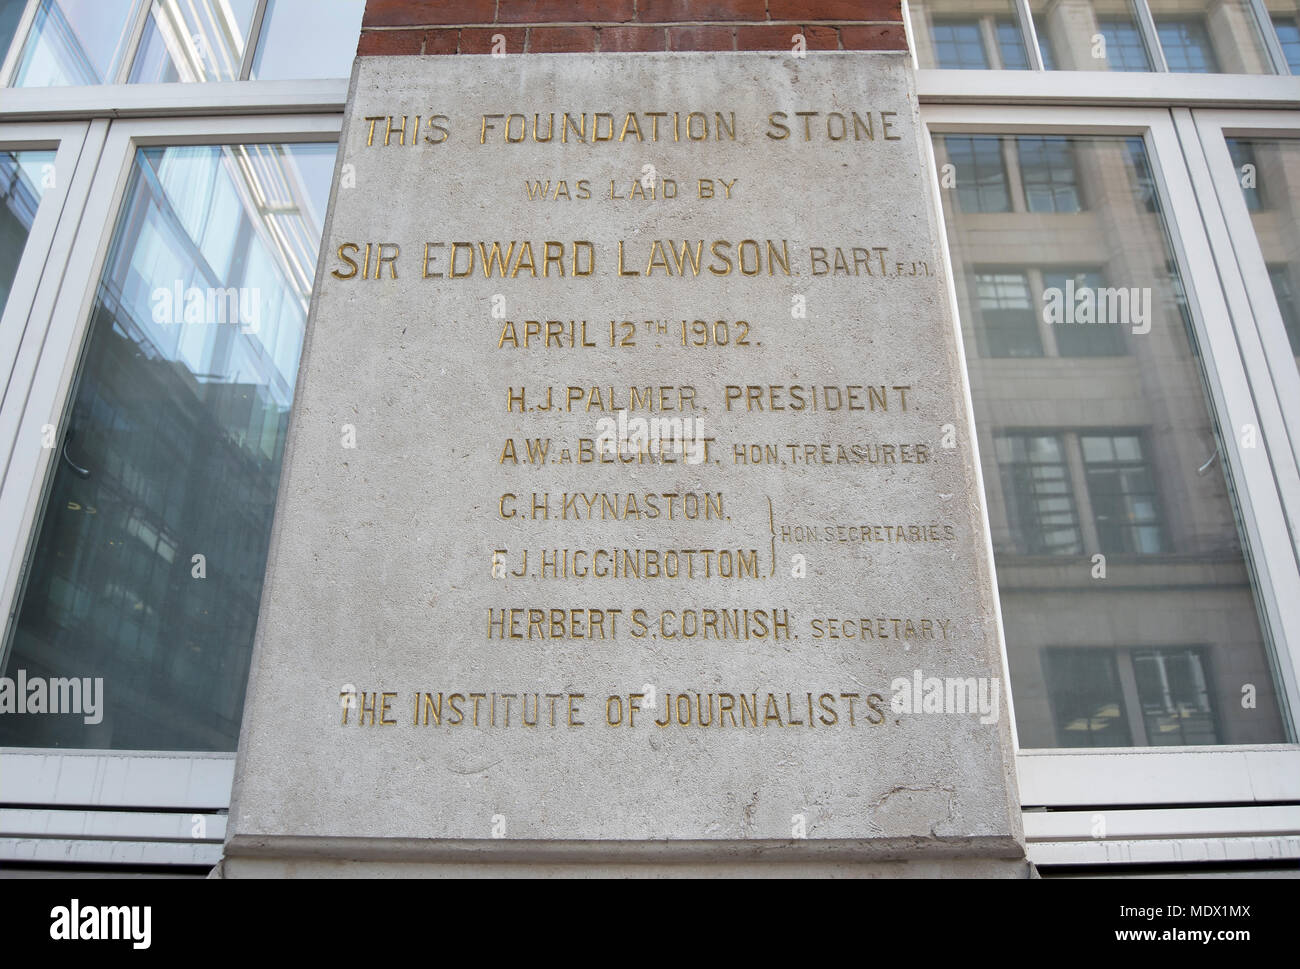 foundation stone laid in 1902 at the institute of journalists building by sir edward lawson, editor of the daily telegraph, london, england Stock Photo